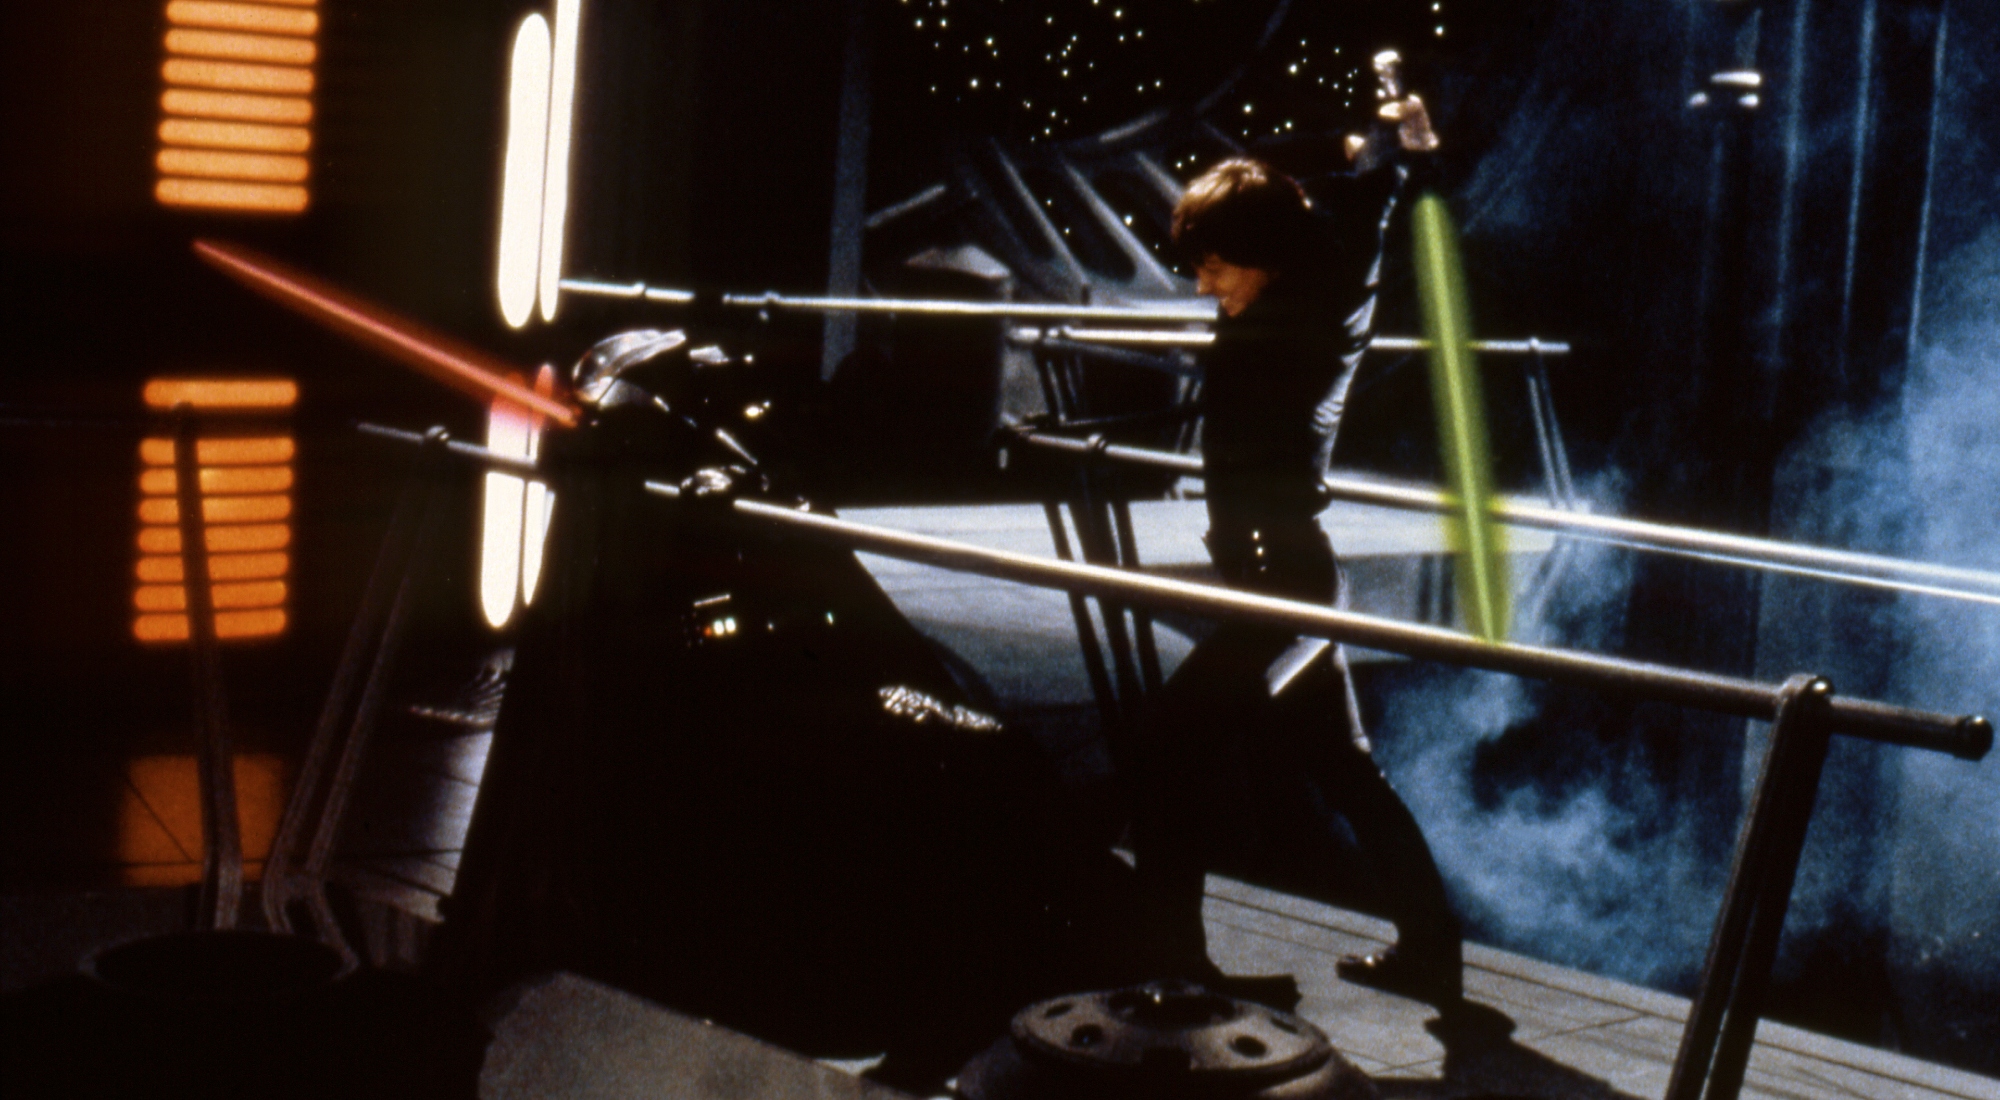 the-darker-return-of-the-jedi-ending-that-would-have-completely-changed-star-wars